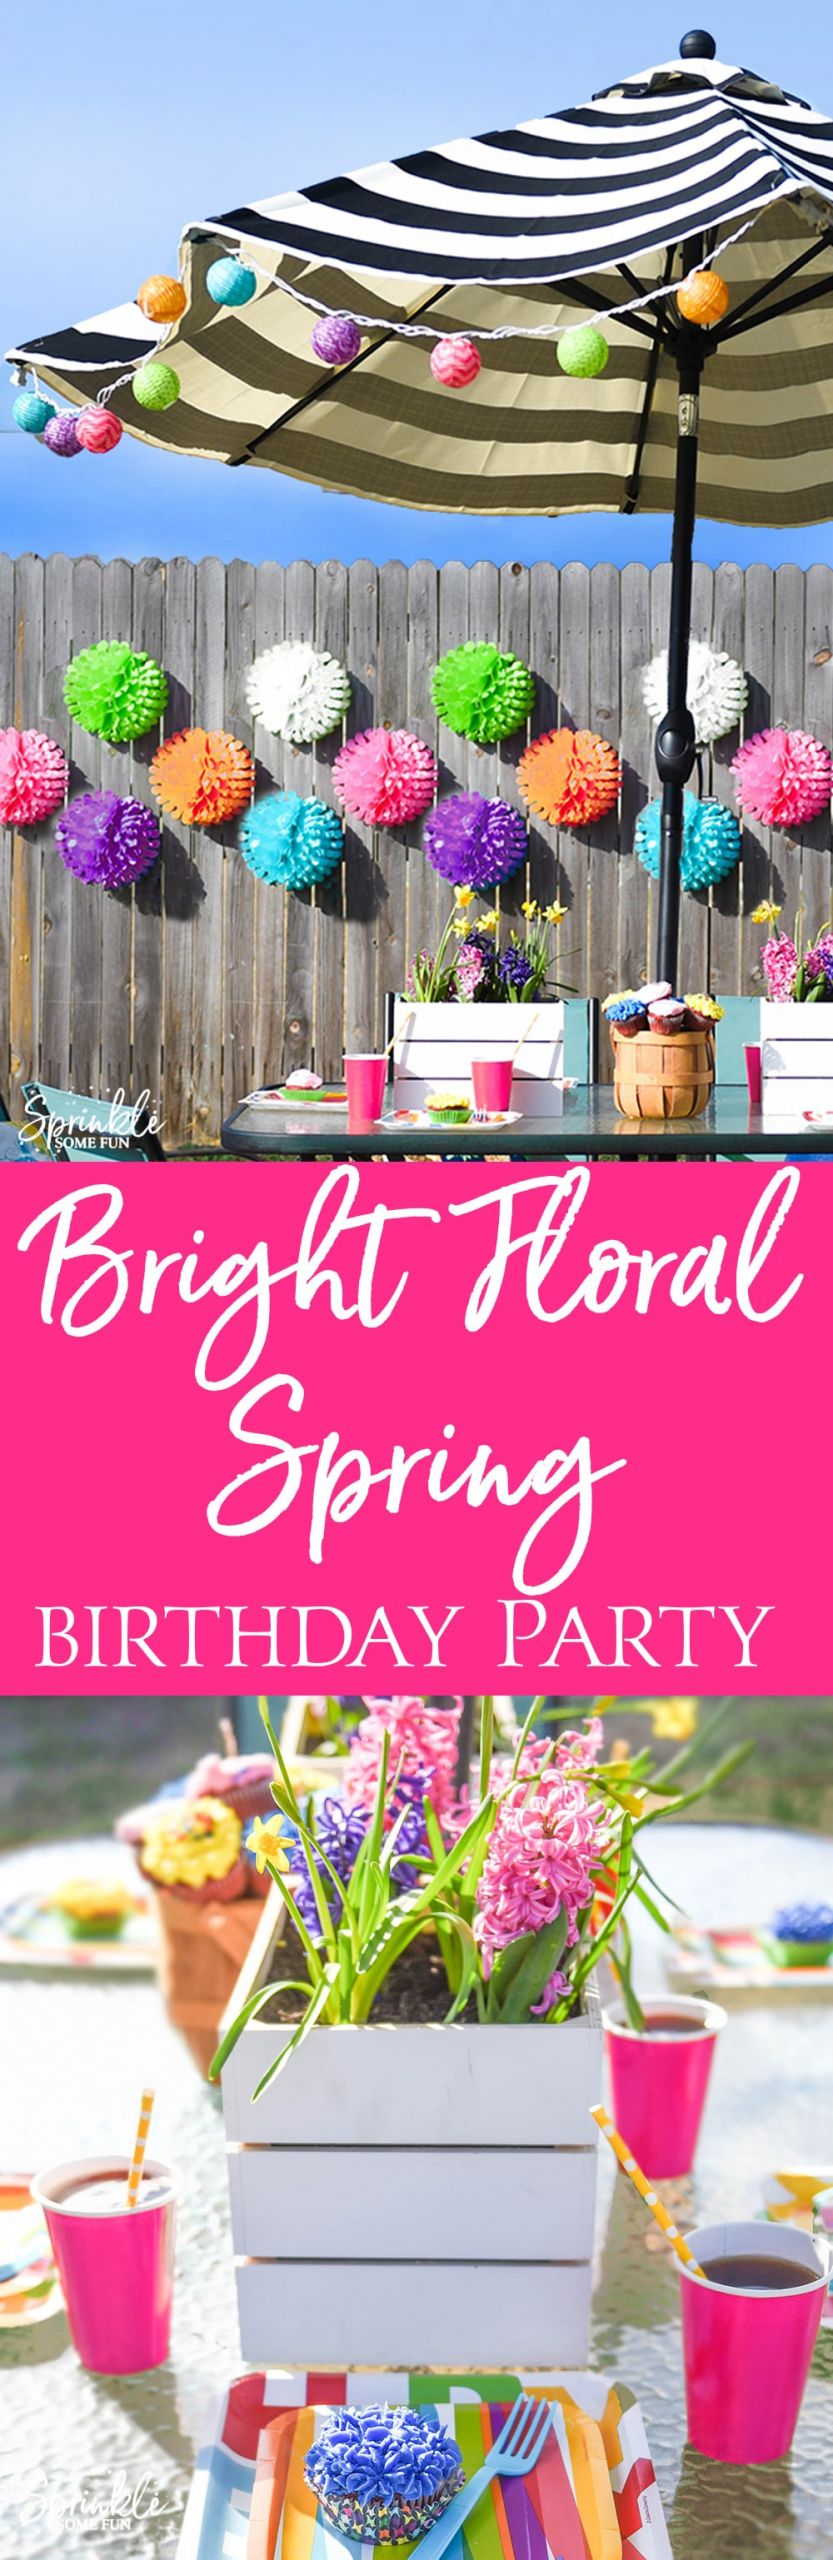 Spring Birthday Party Ideas
 Bright Floral Spring Birthday Party • Sprinkle Some Fun